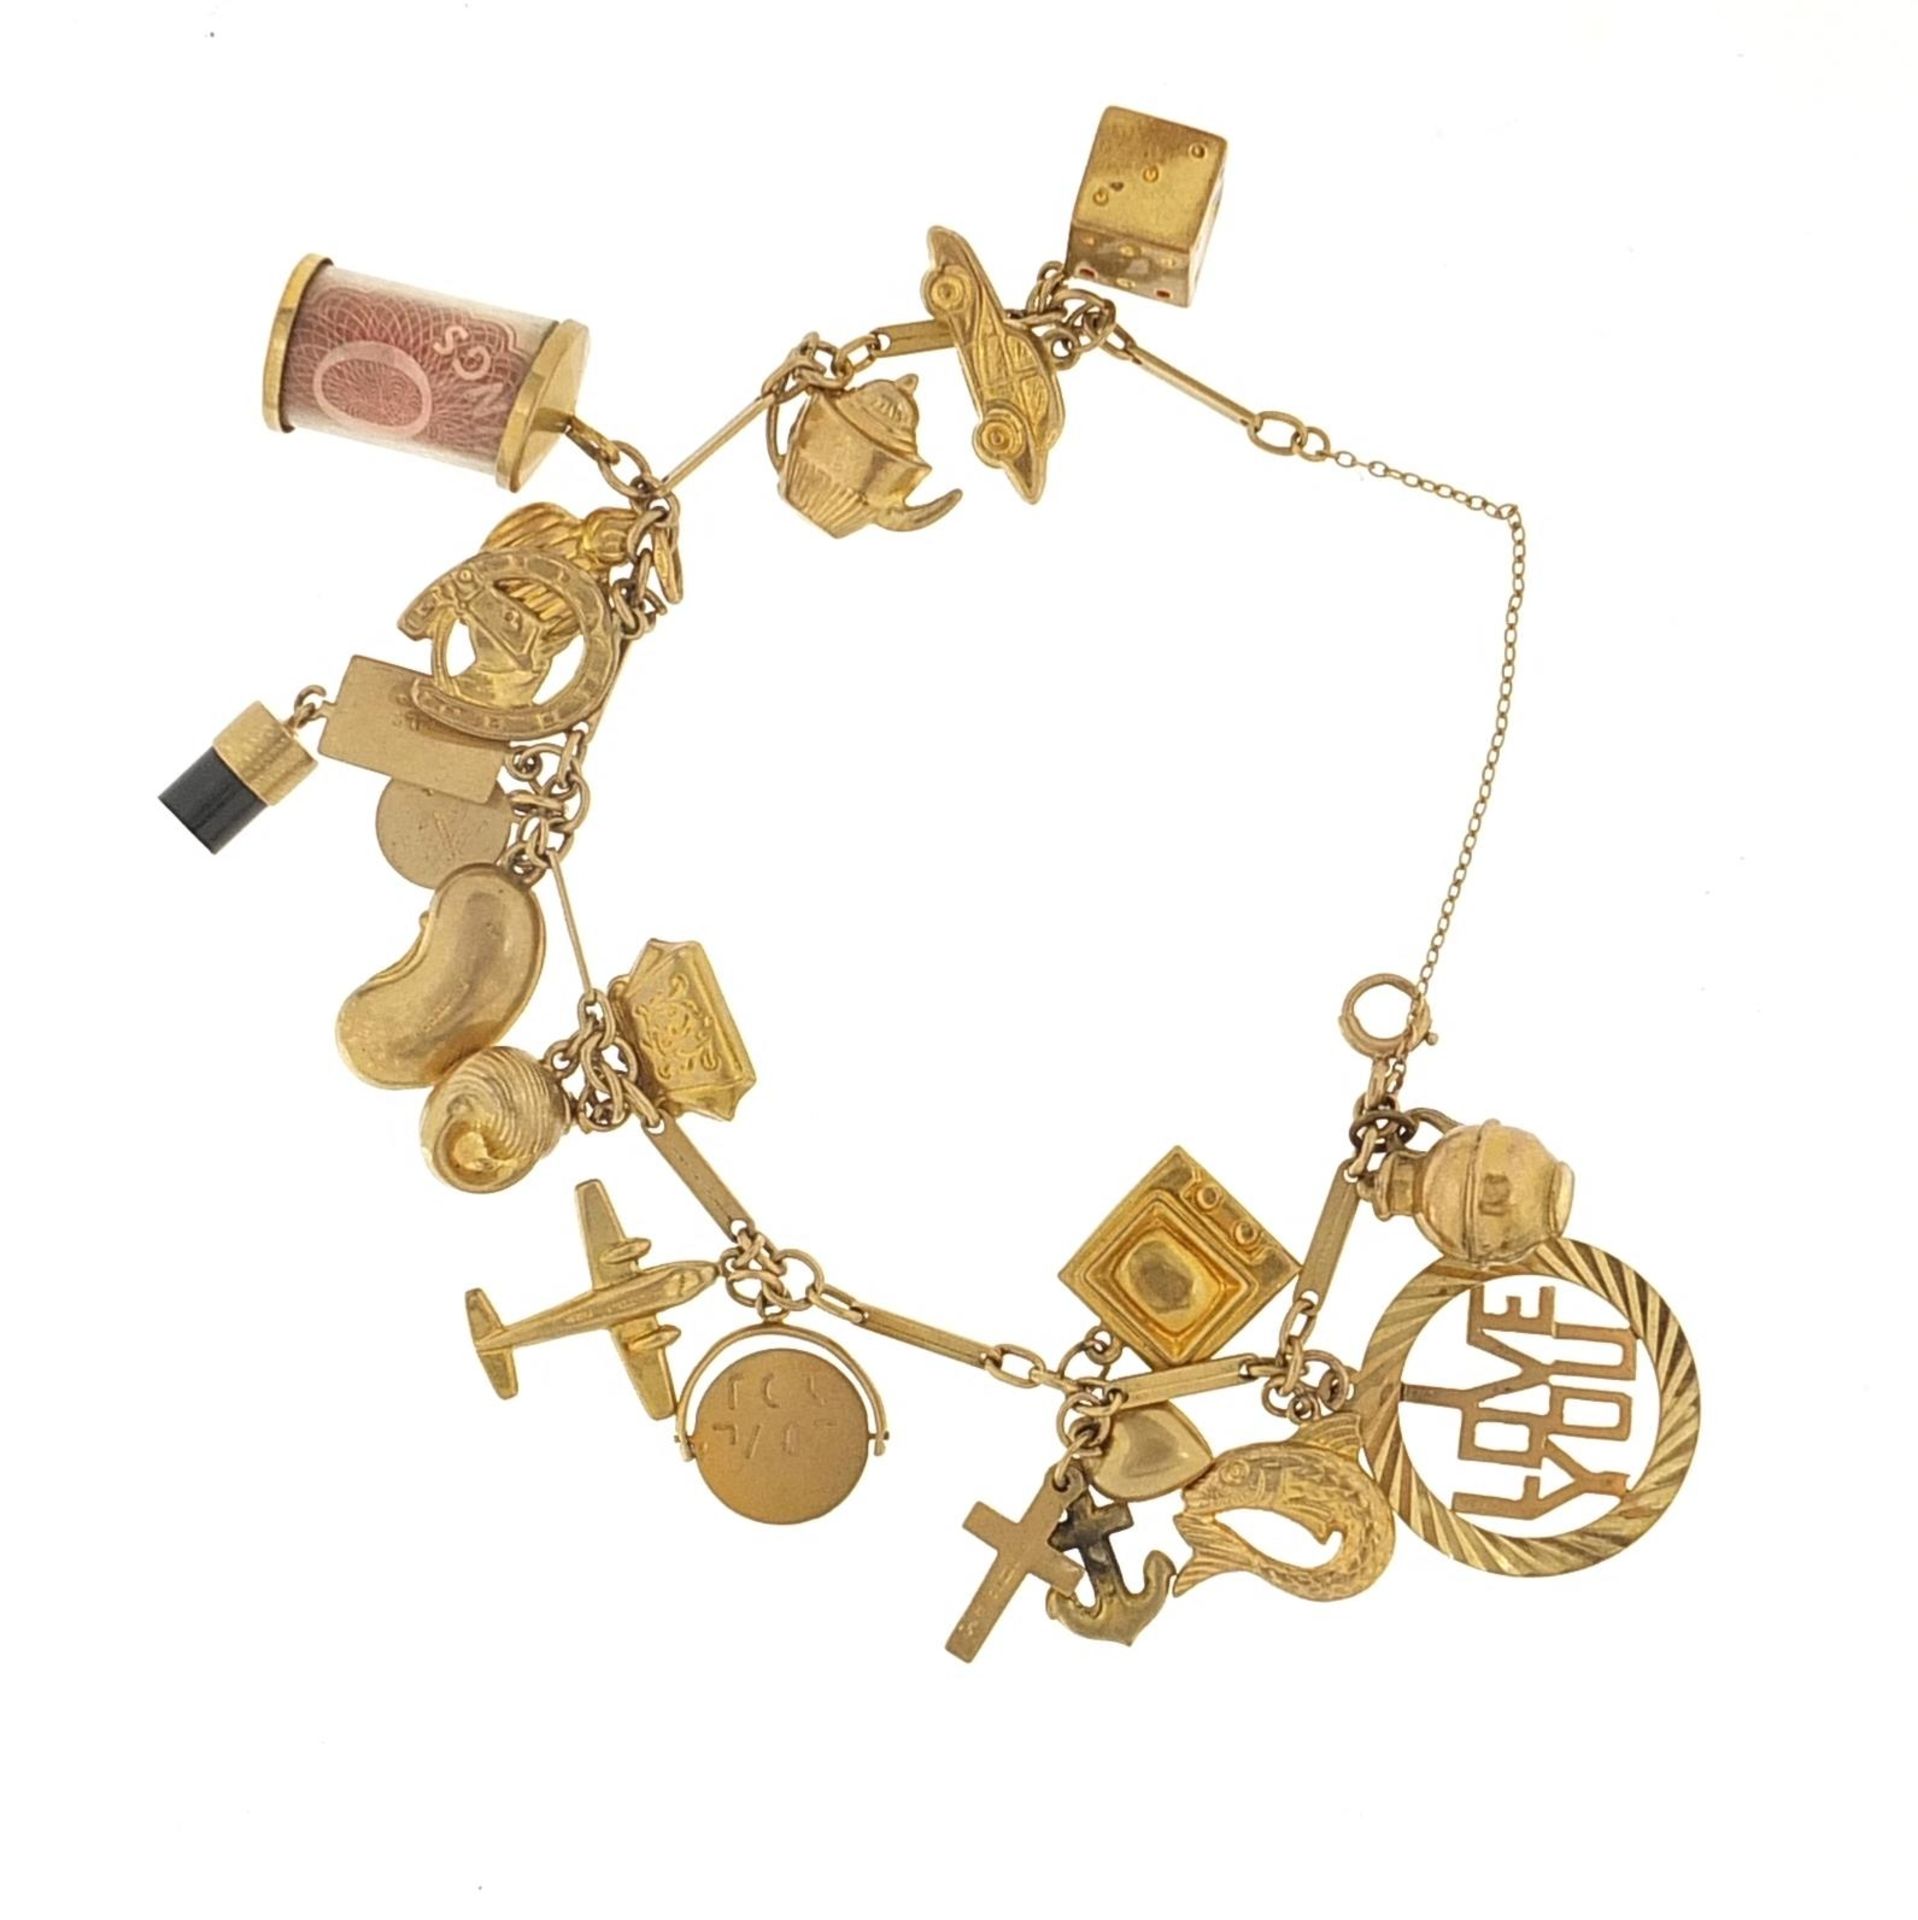 9ct gold charm bracelet with a selection of mostly 9ct gold charms including emergency ten - Bild 2 aus 3